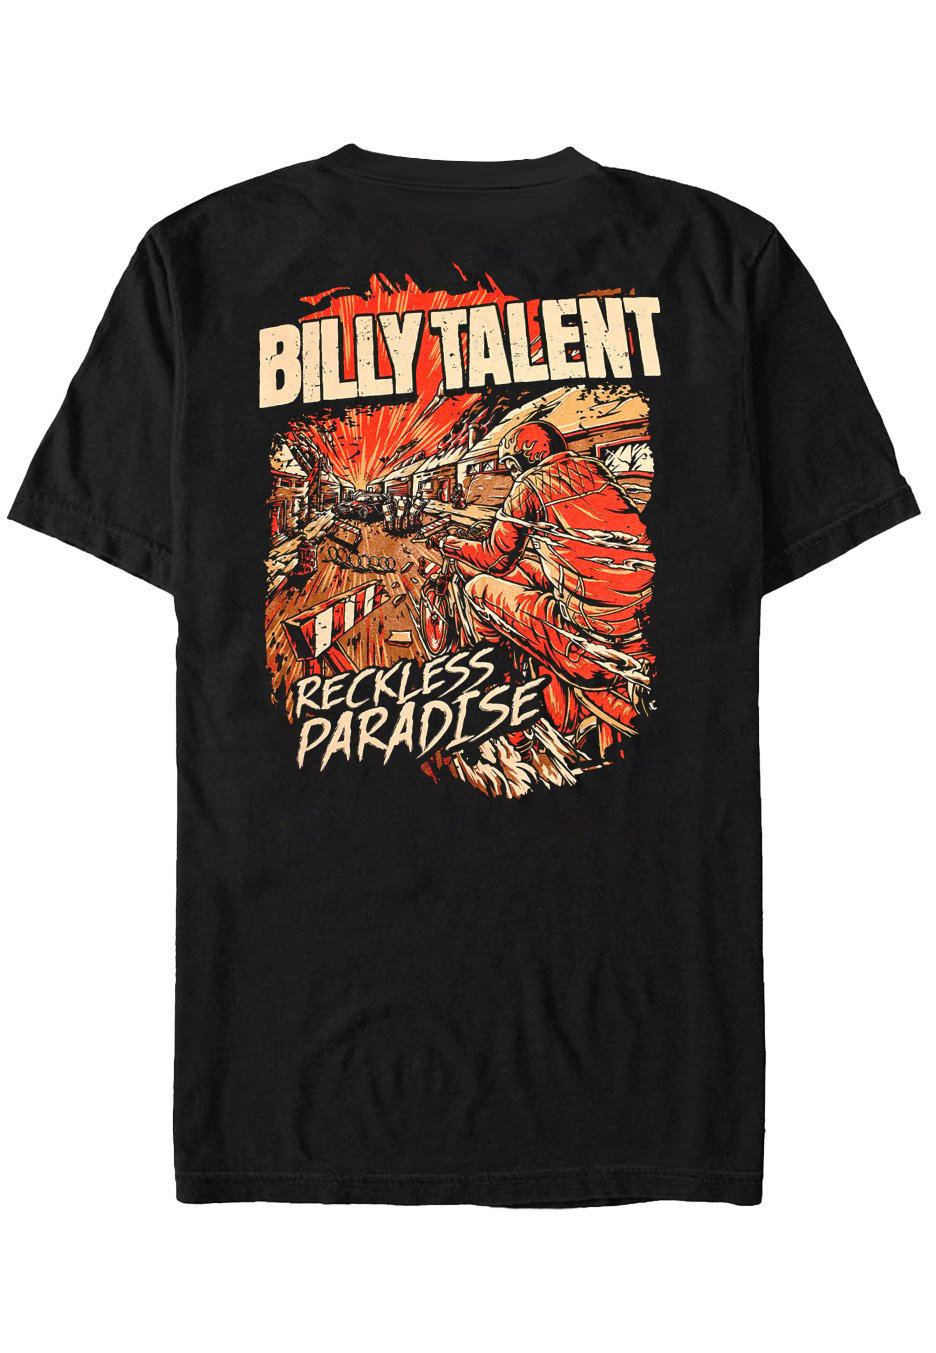 Billy Talent - Reckless Paradise - T-Shirt | Neutral-Image